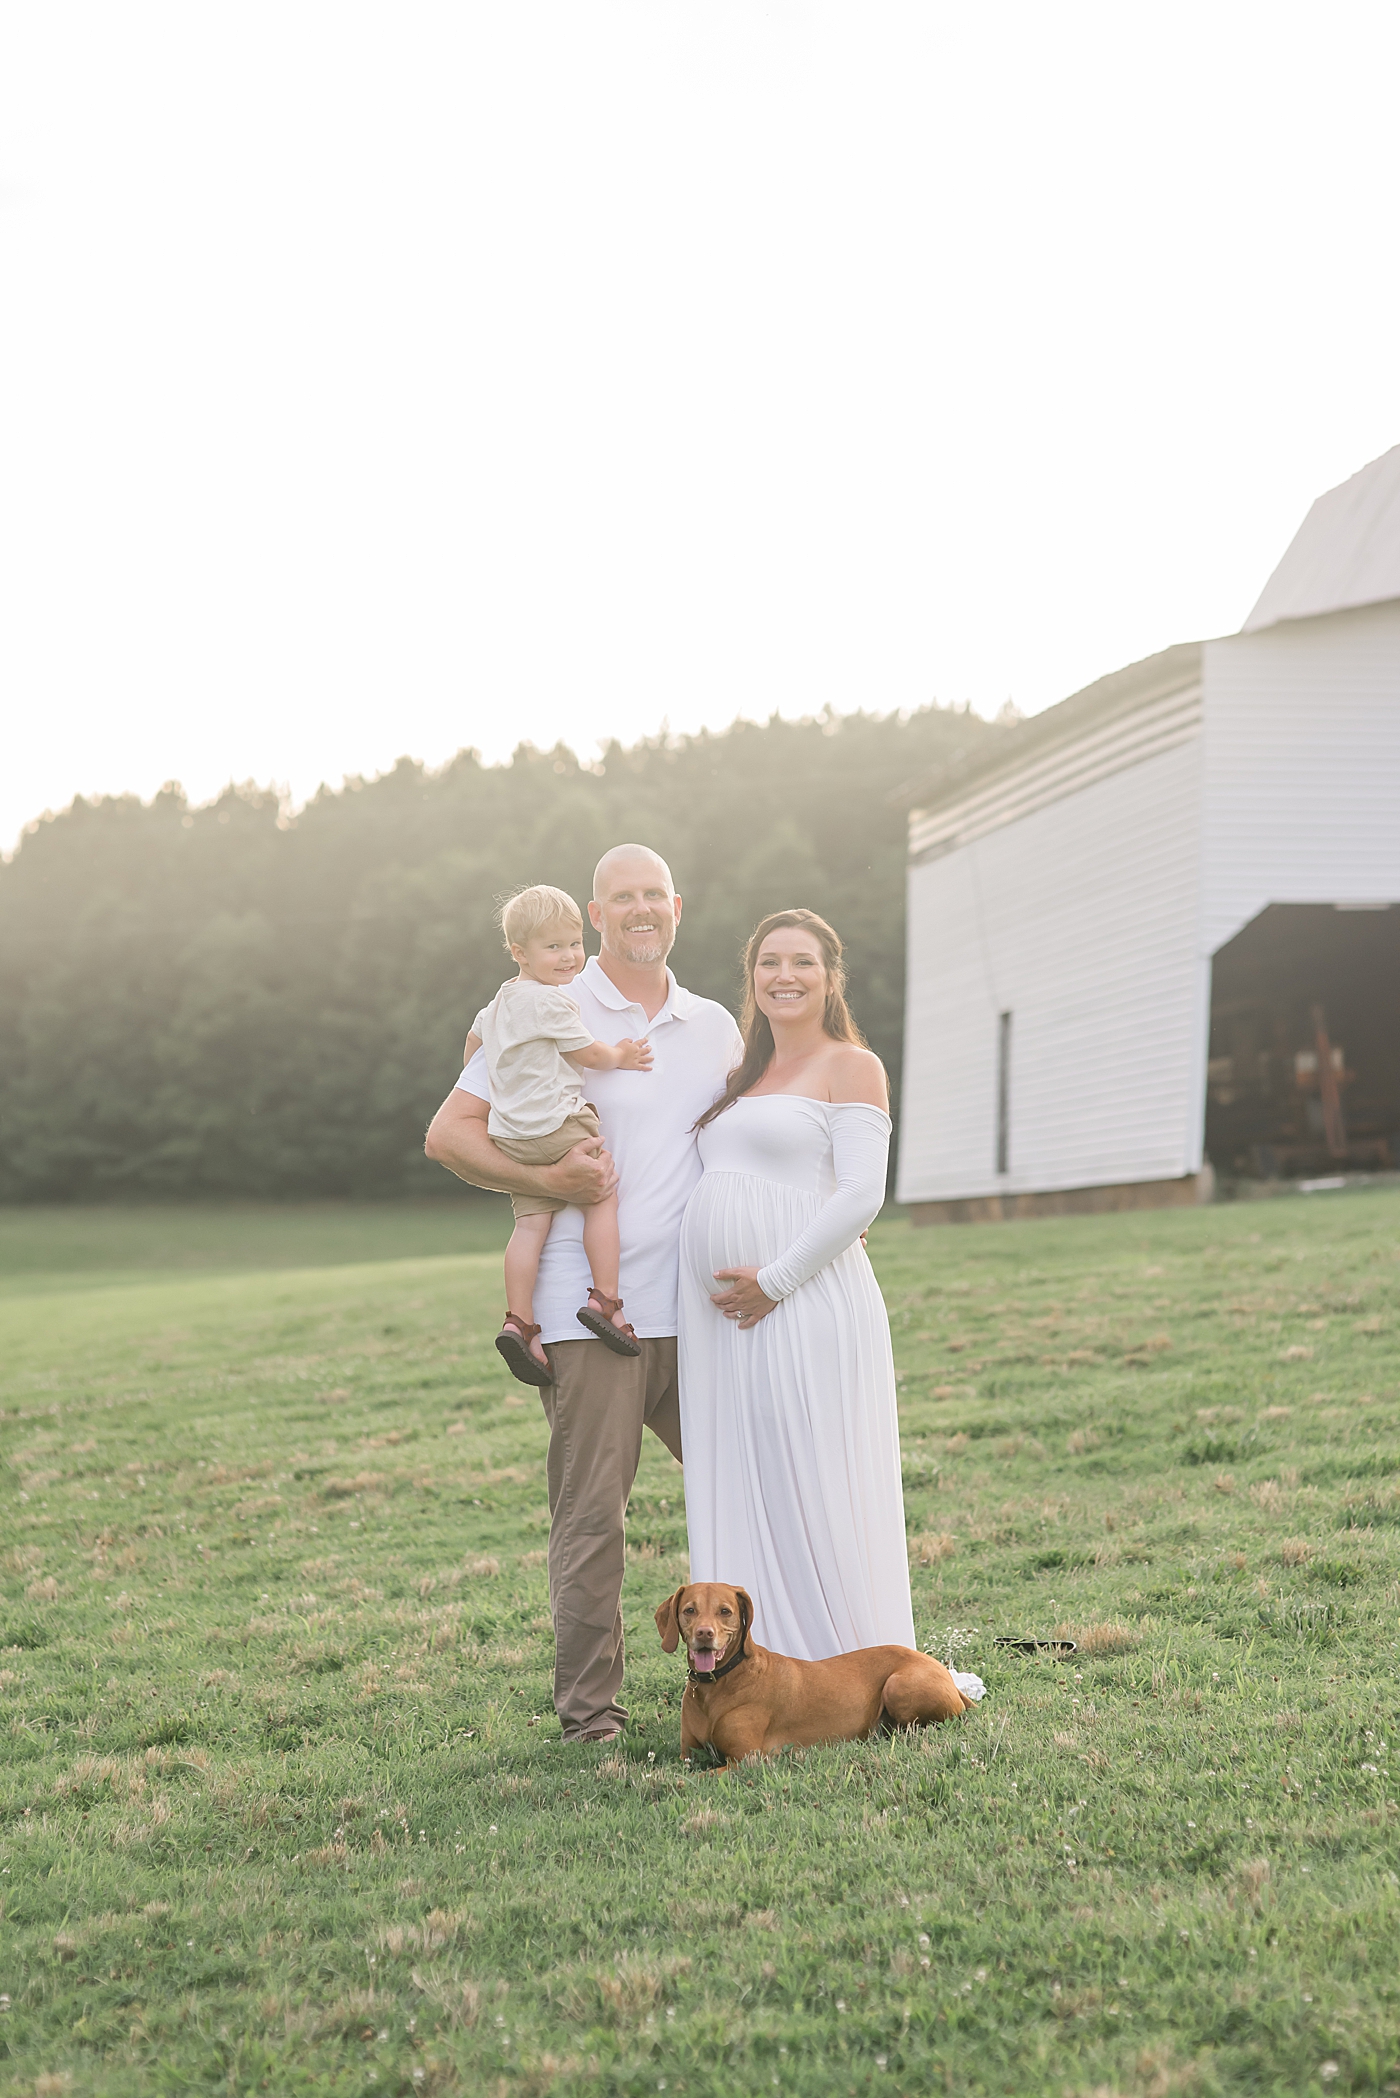 Mom, dad, and toddler boy with their dog | Photo by Anna Wisjo Photography